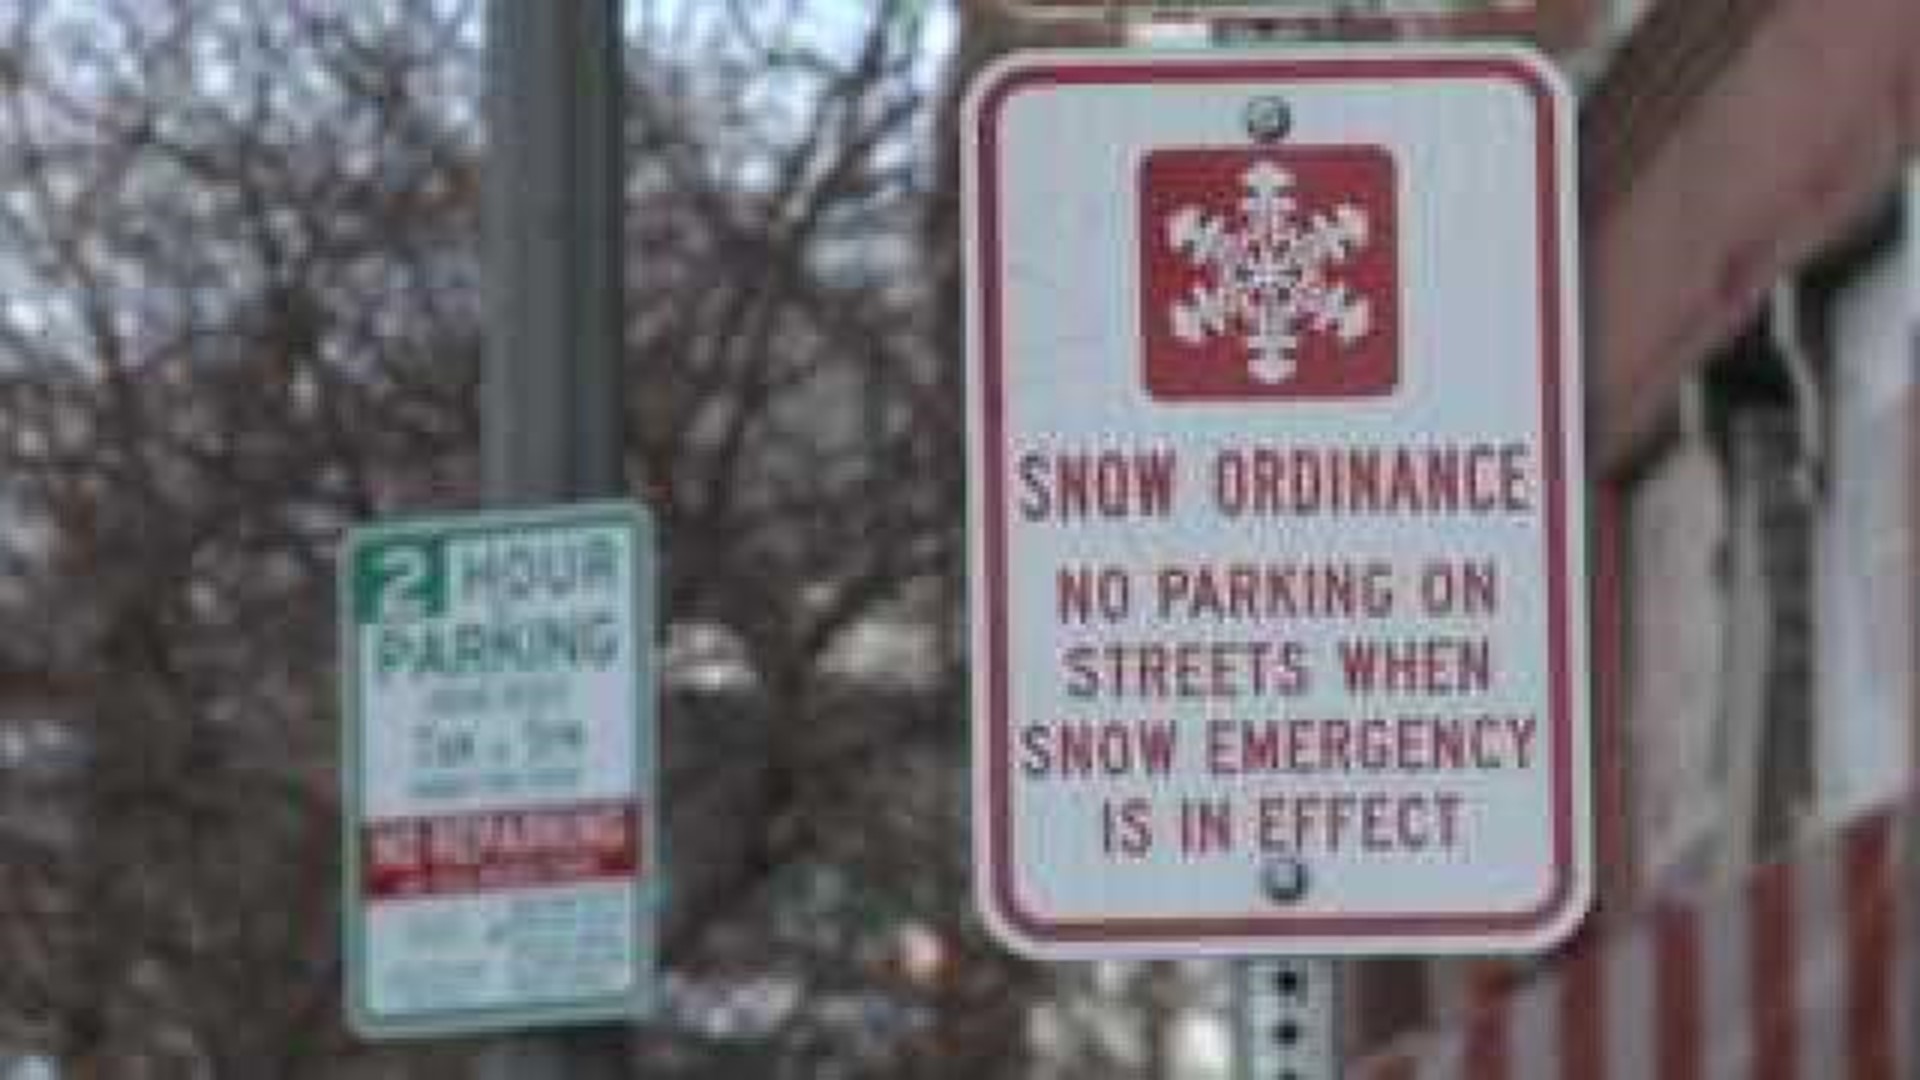 Snow route confusion in Davenport could result in being towed